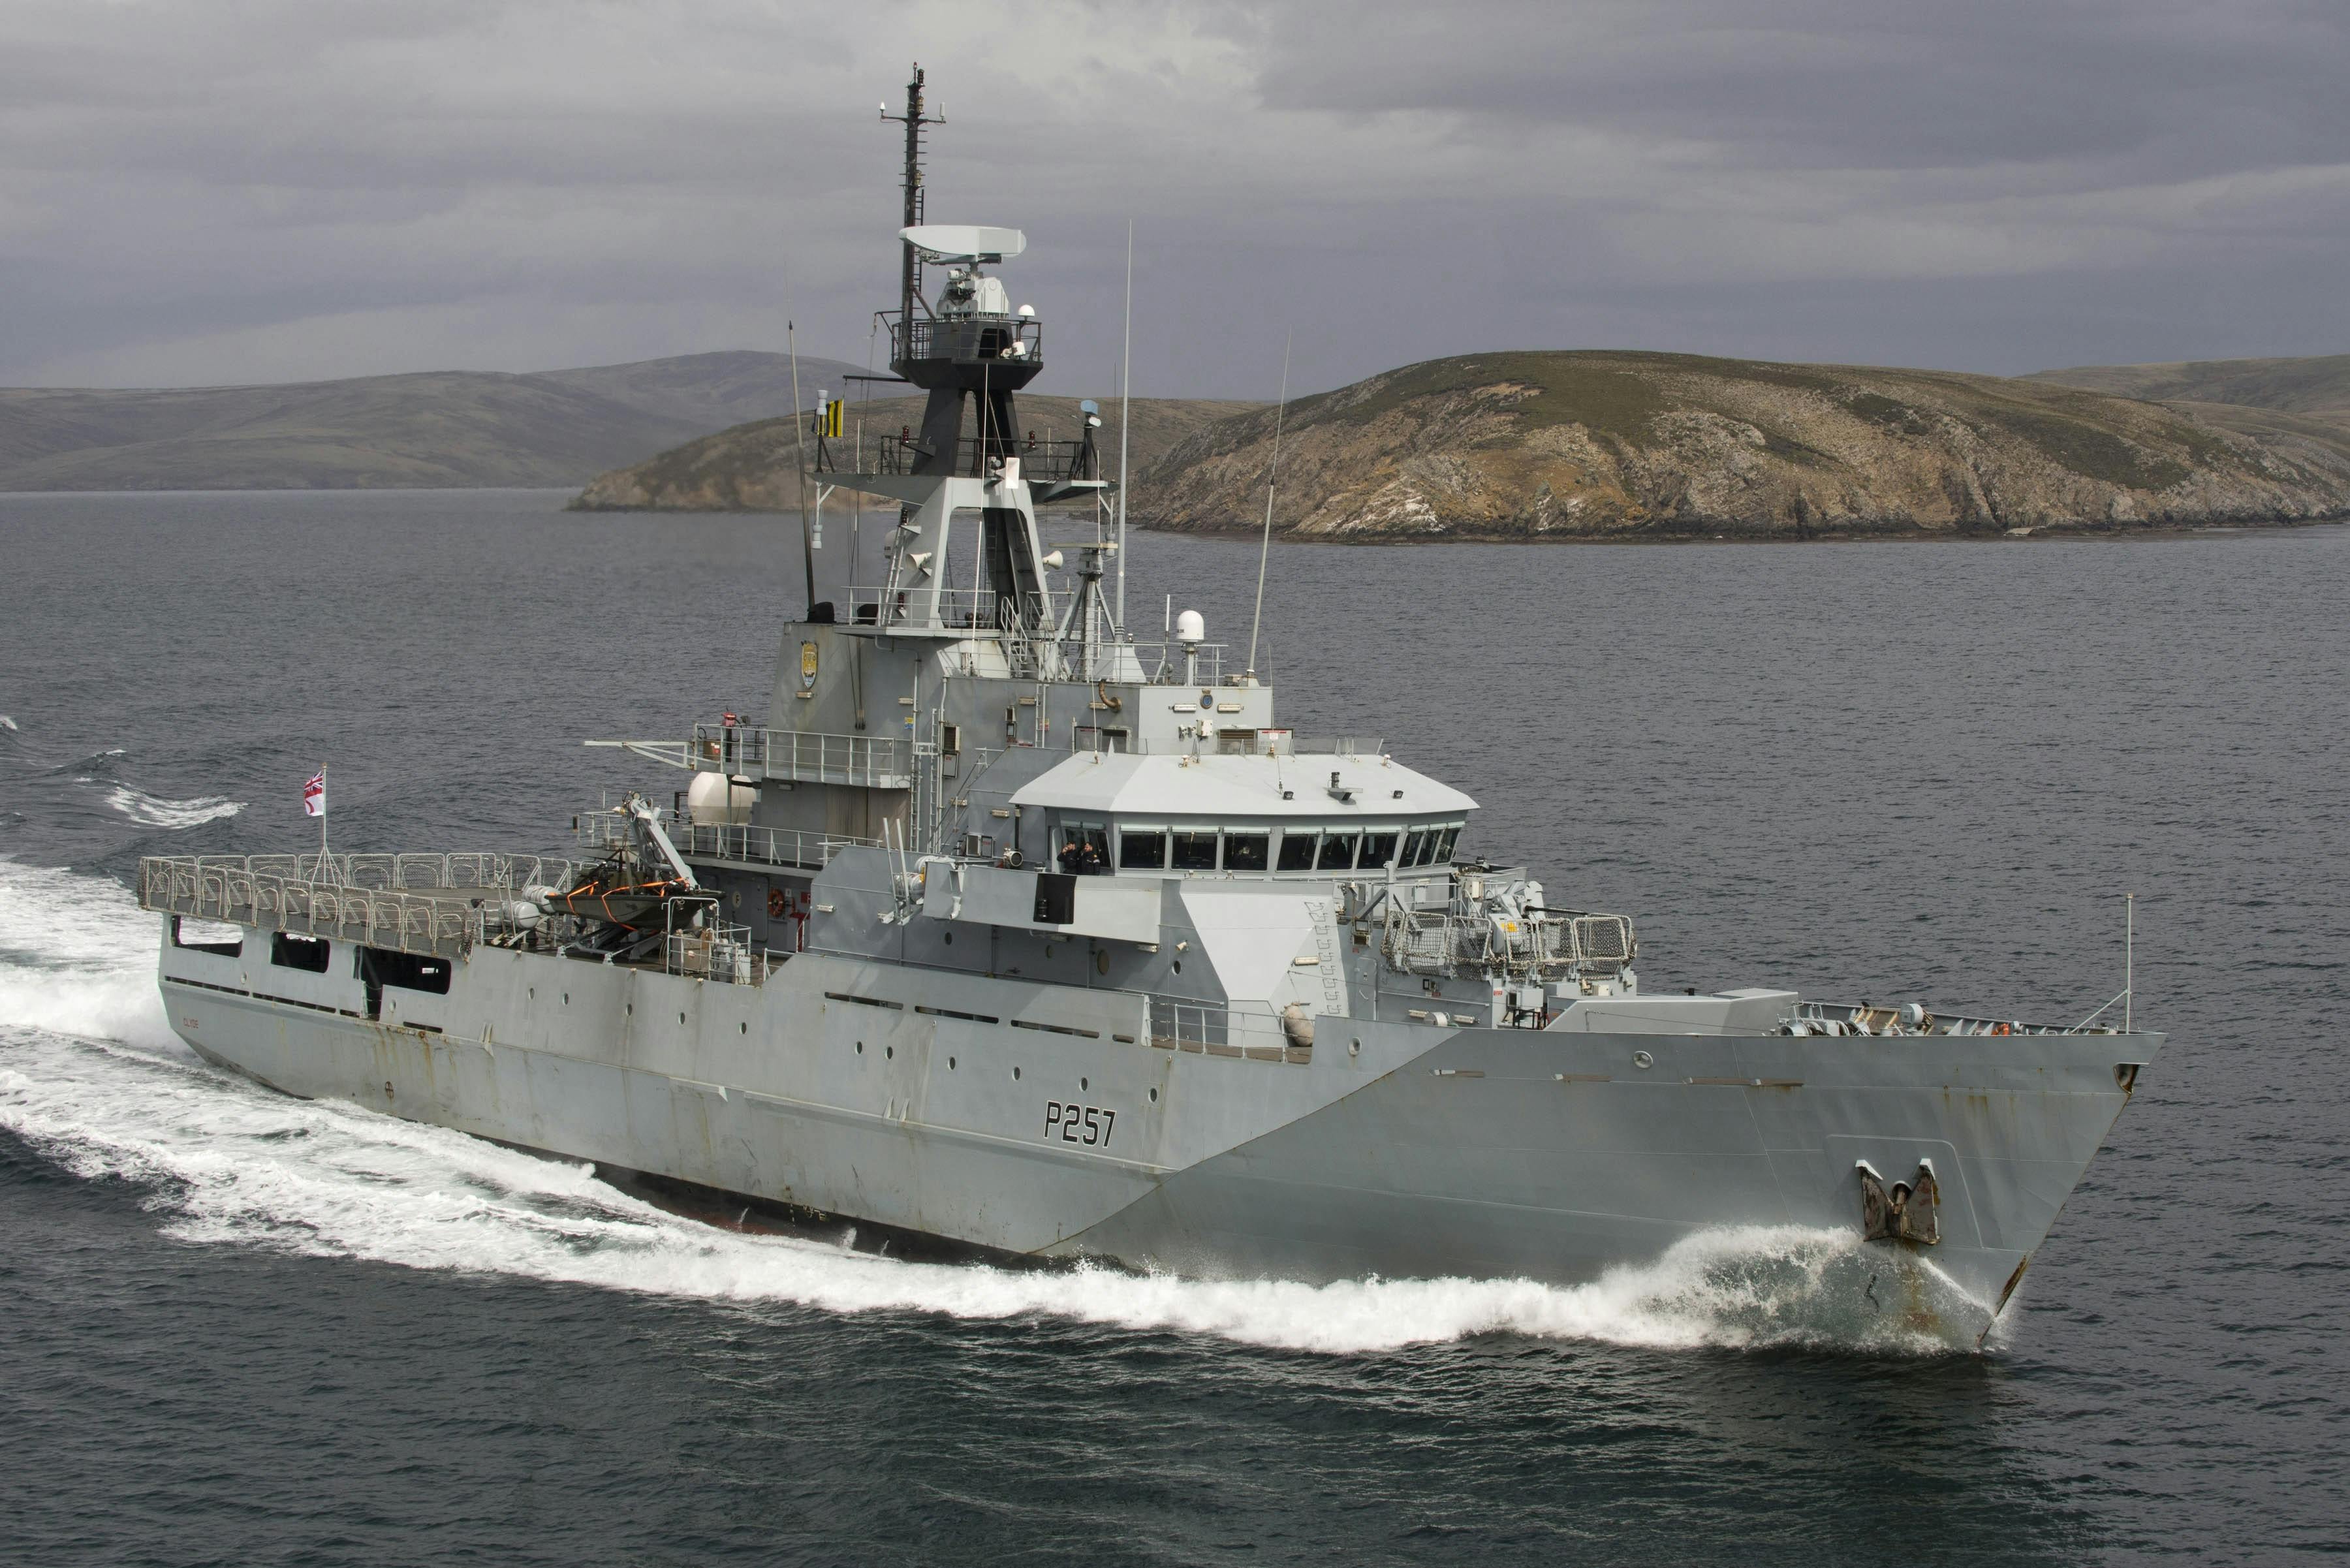 Brazil to take over HMS Clyde once Royal Navy lease expires